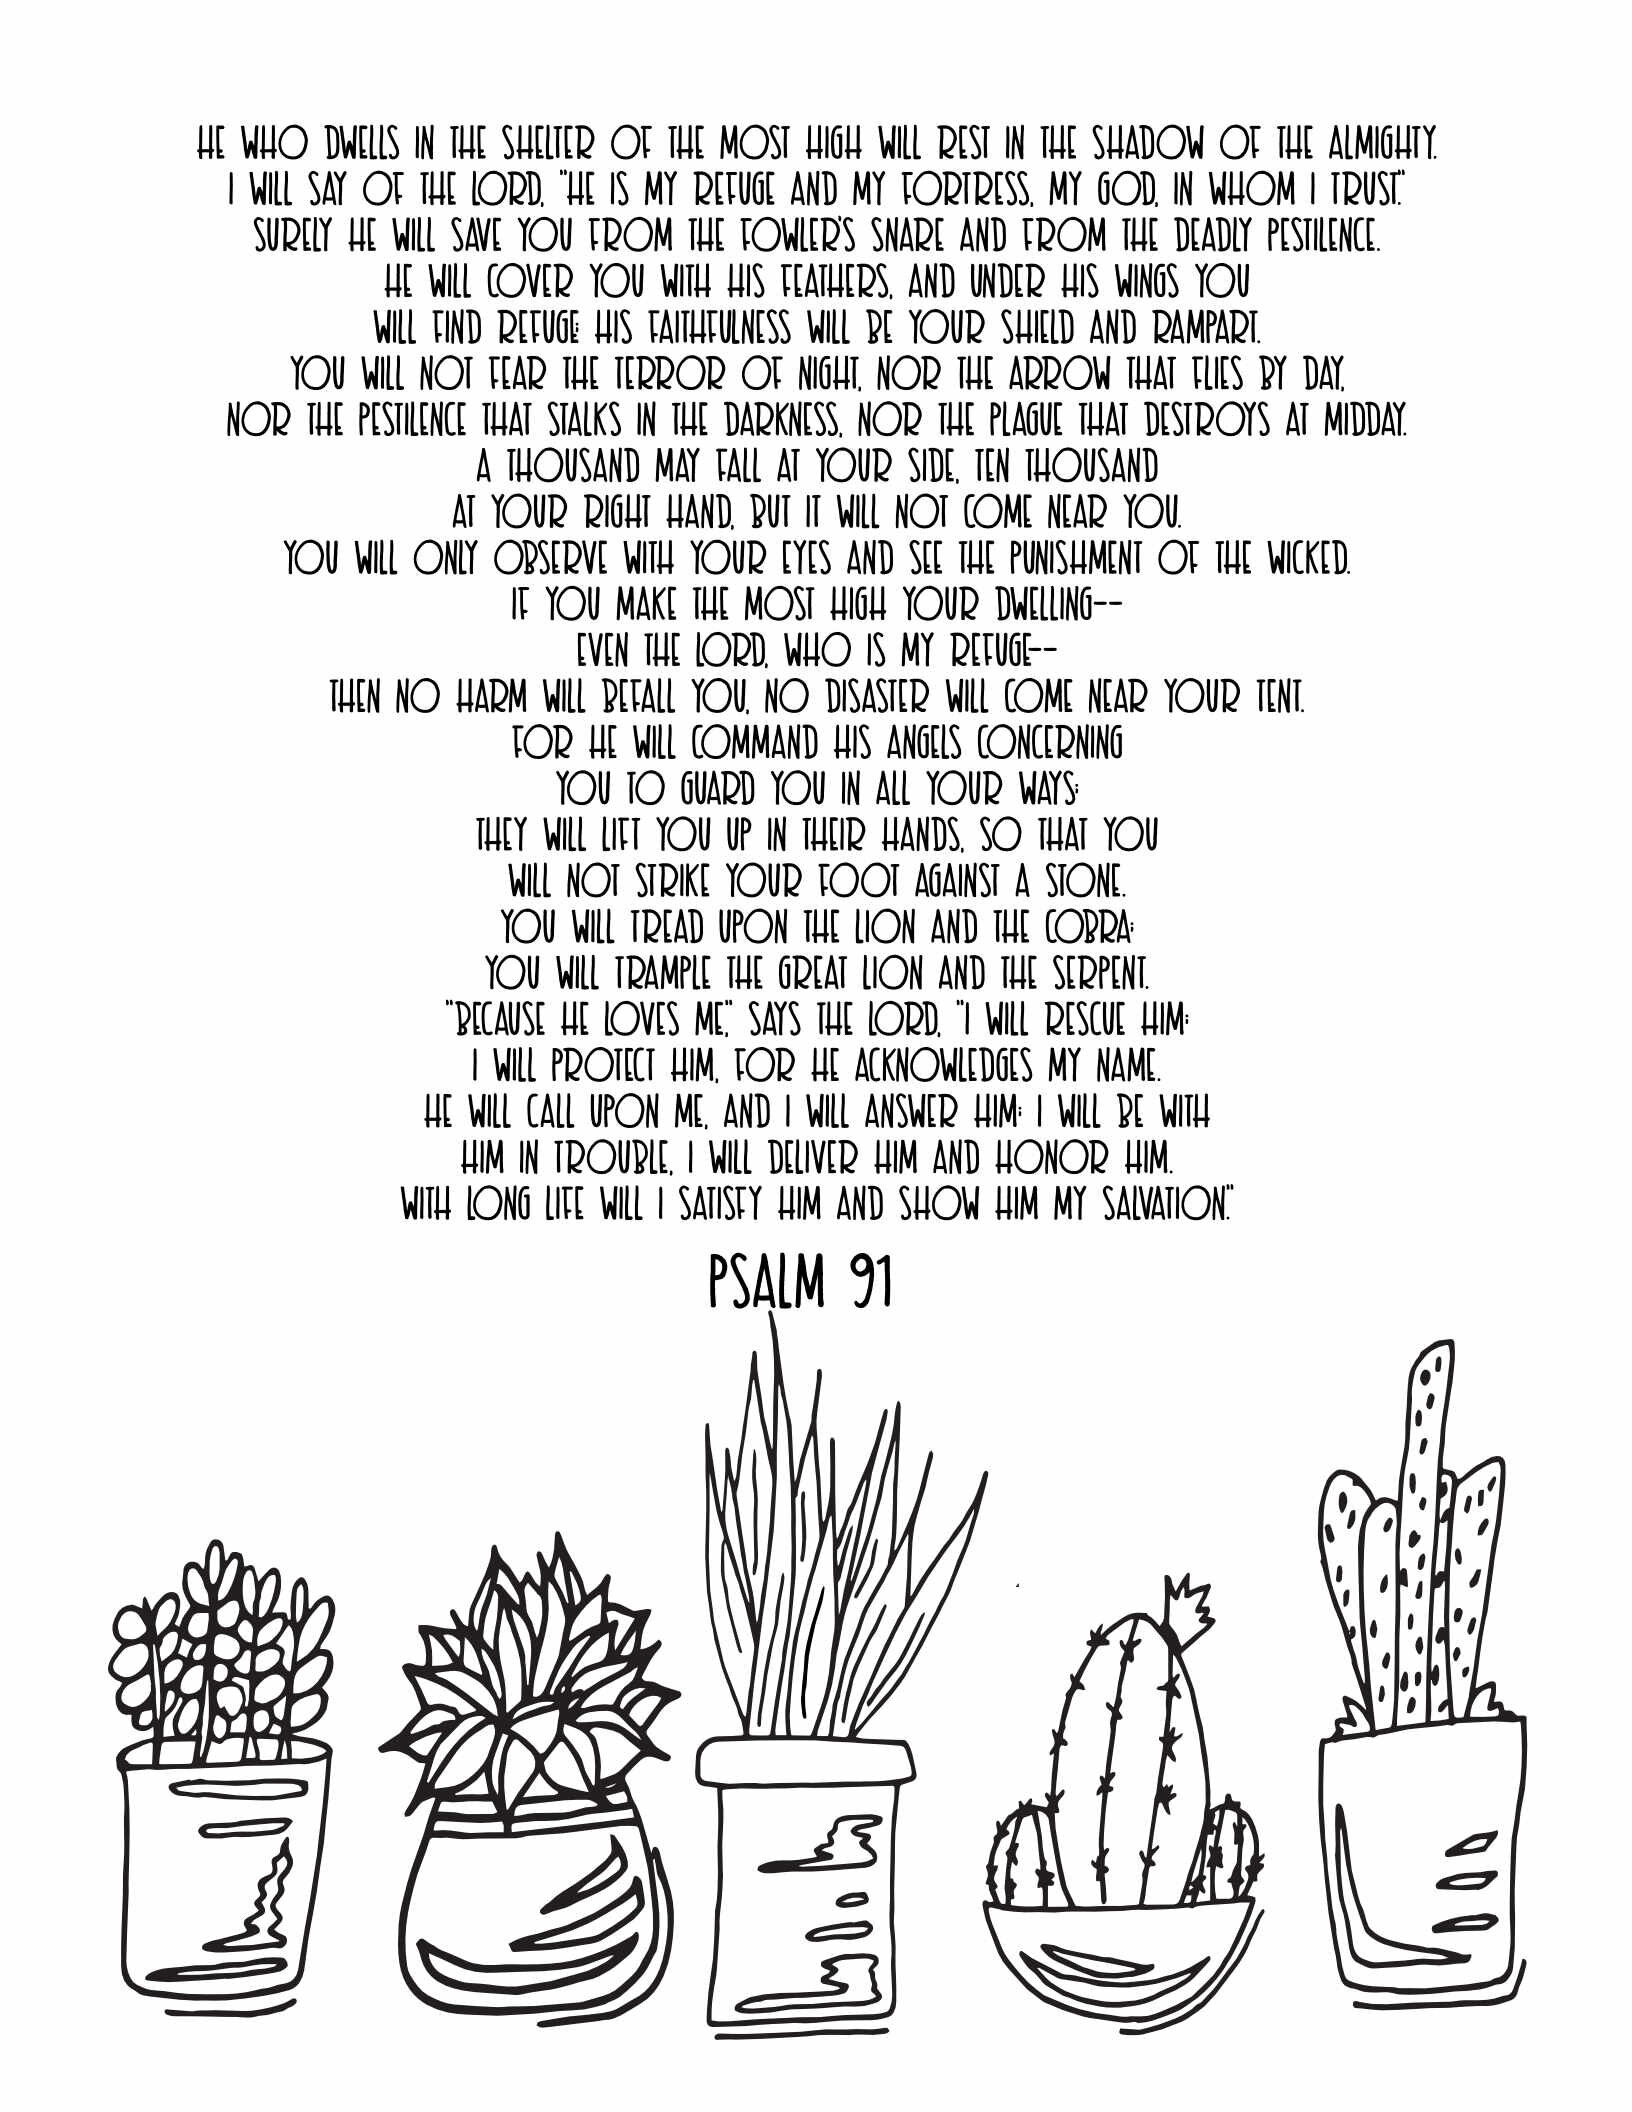 10 Free Printable Psalm Coloring Pages - Download and Color Adult Scripture - Psalm 91CLICK HERE TO DOWNLOAD THIS PAGE FREE